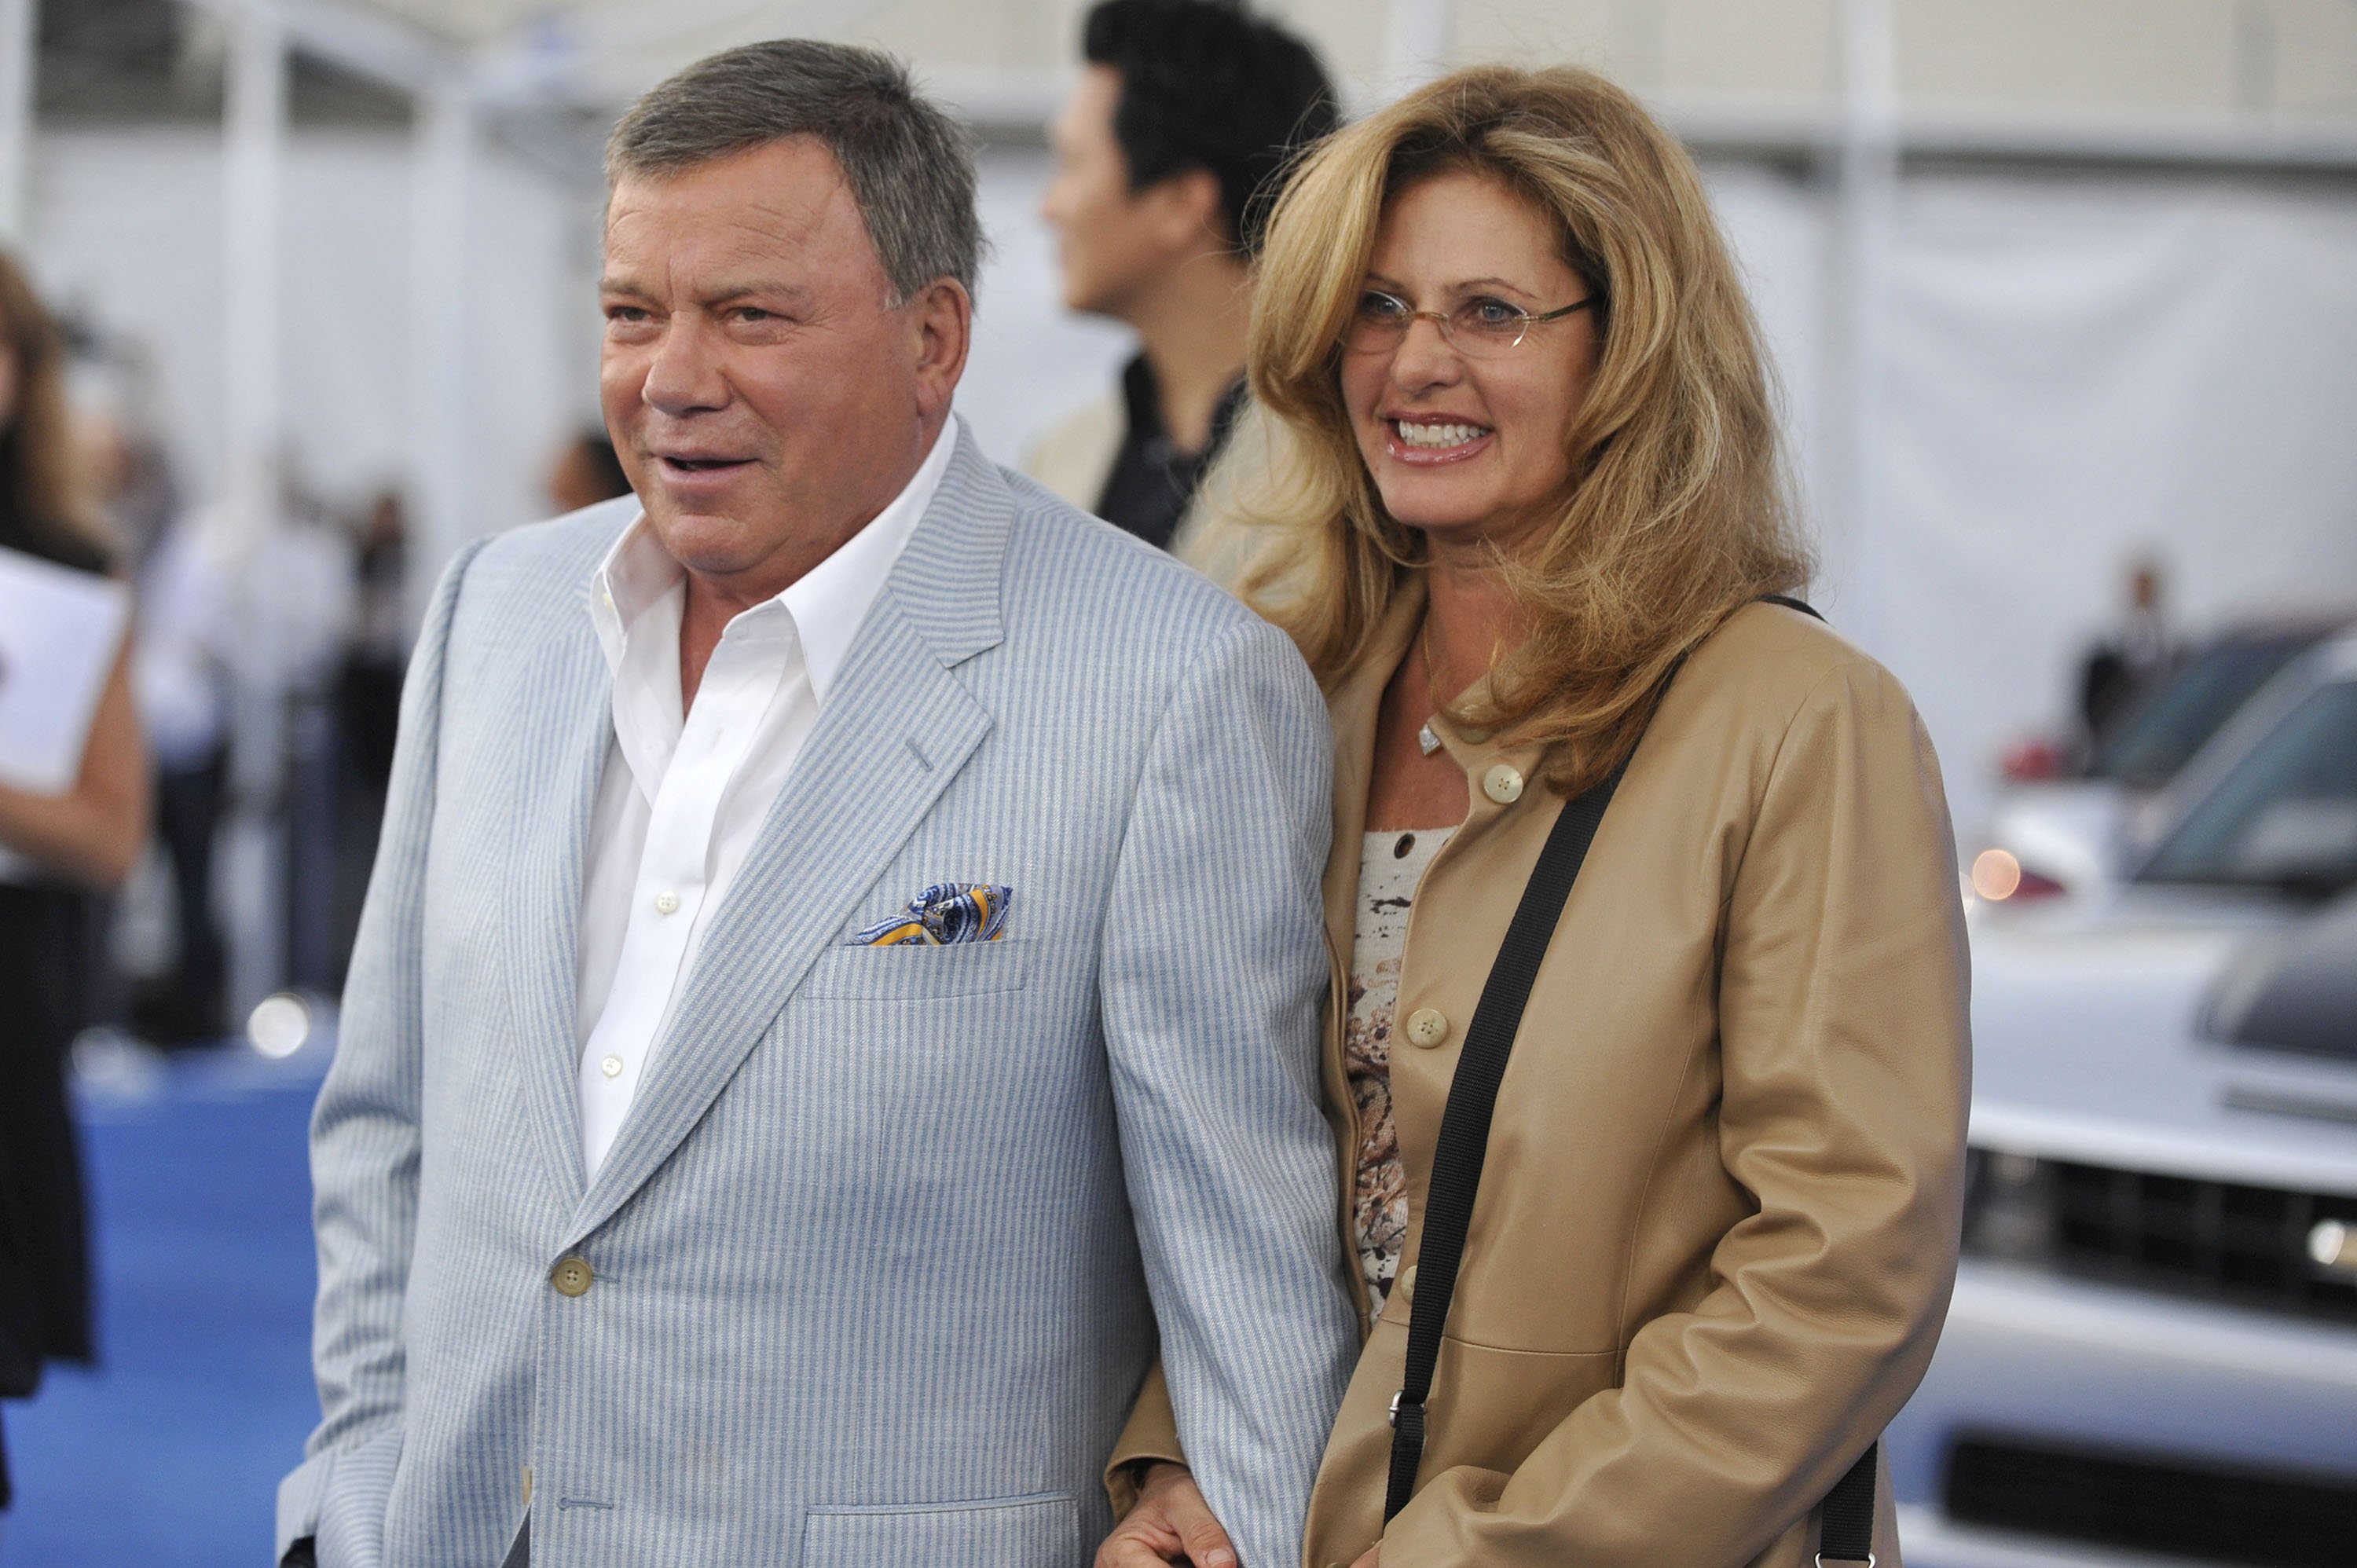 William and Elizabeth Shatner Divorced after 18 Years of Marriage